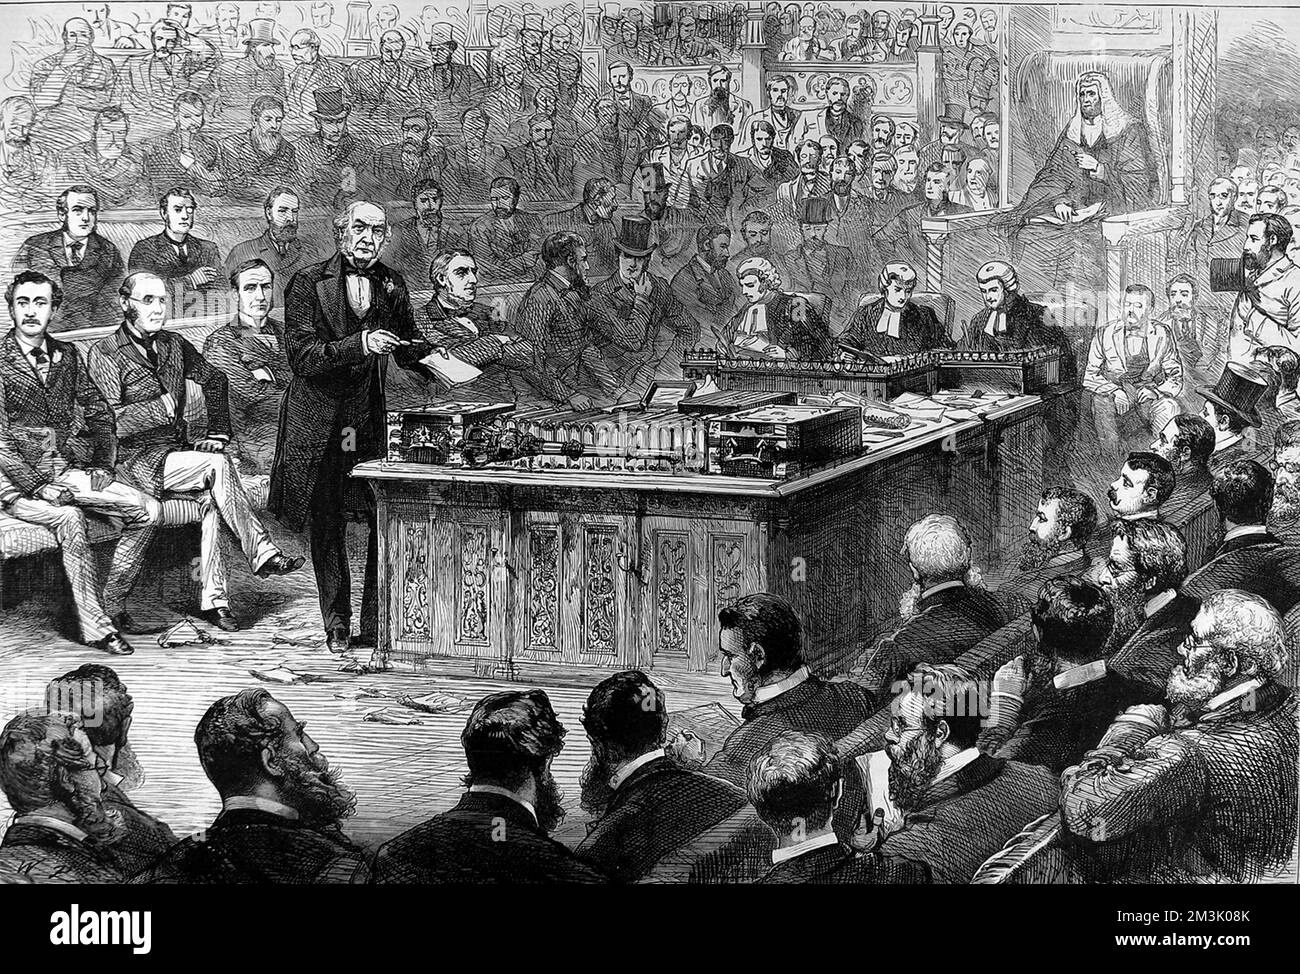 William Ewart Gladstone (1809 - 1898), English Liberal statesman (centre left), addressing the House of Commons during a debate on Irish Home Rule. Gladstone twice tried to introduce a Home Rule Bill for Ireland, but was defeated once in the Commons and once in the Lords.     Date: 8th April 1886 Stock Photo